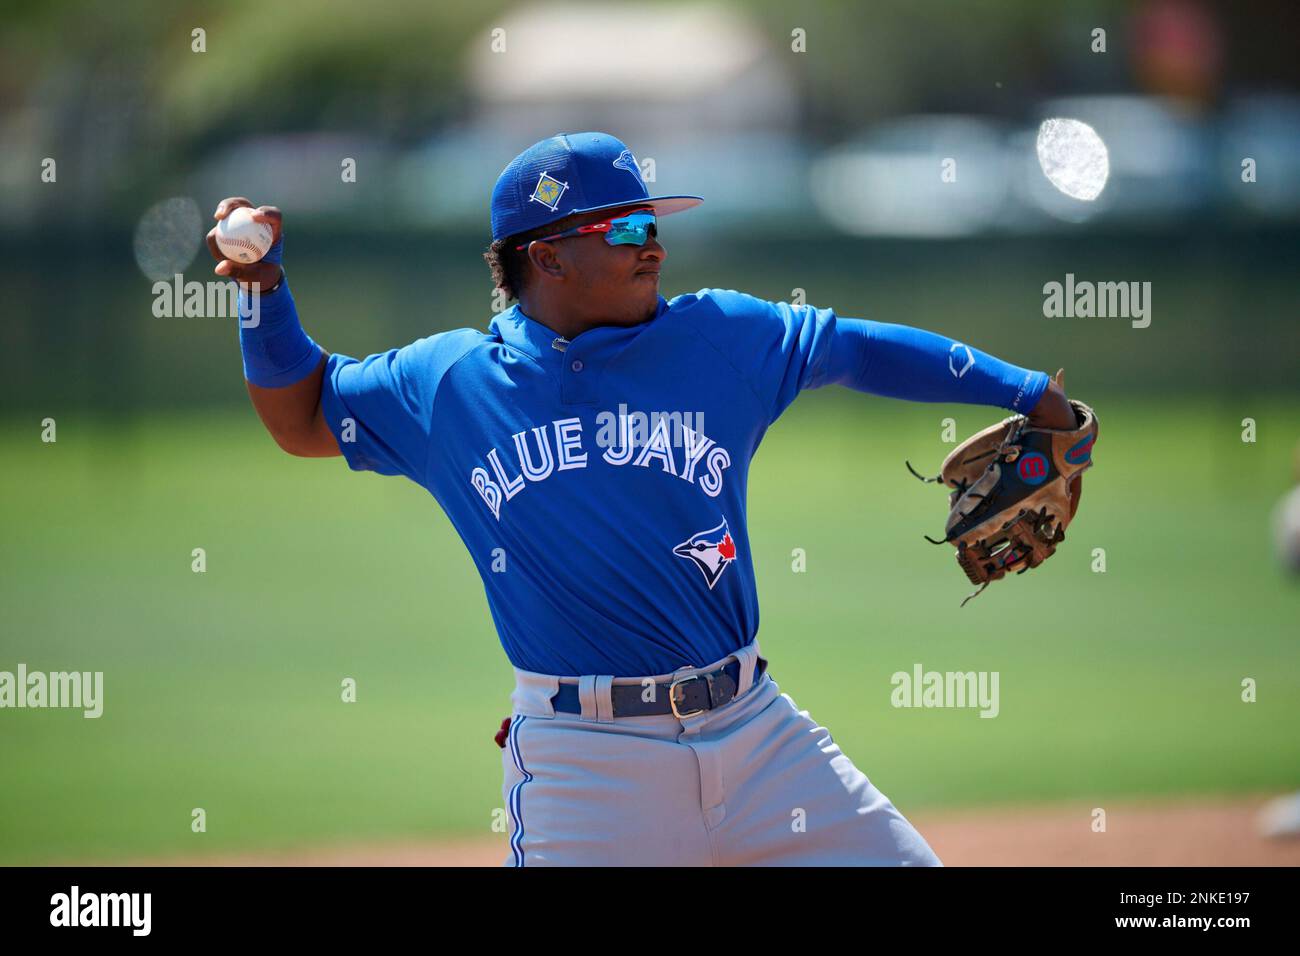 Toronto Blue Jays third baseman Francisco Fajardo (52) throws to first base during a MiLB Spring Training game against the Philadelphia Phillies on March 20, 2022 at the Carpenter Complex in Clearwater,